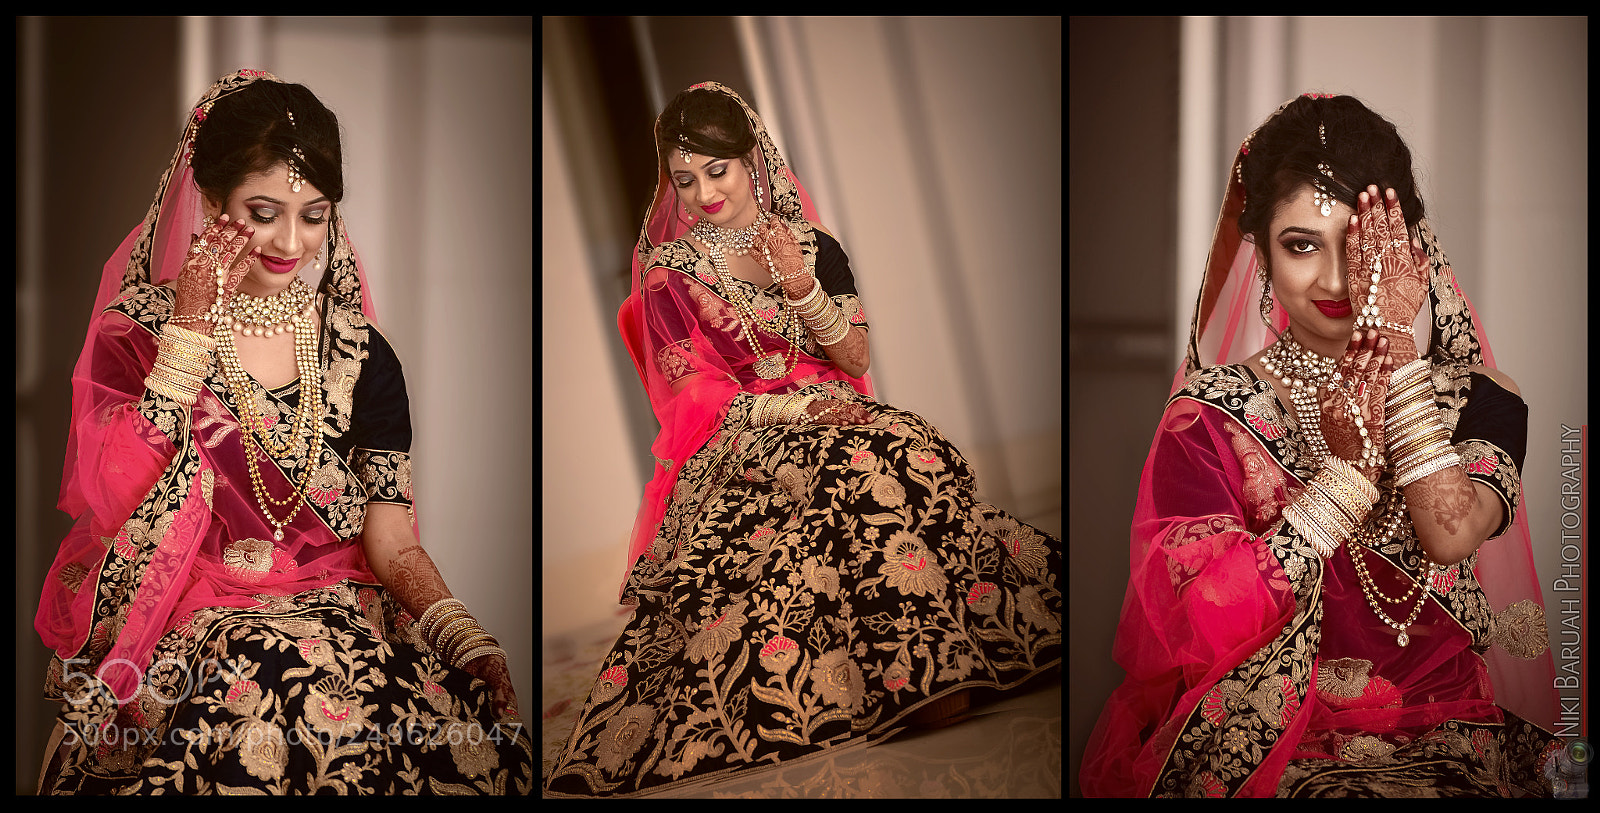 Nikon D7000 sample photo. Her bridal collage photography